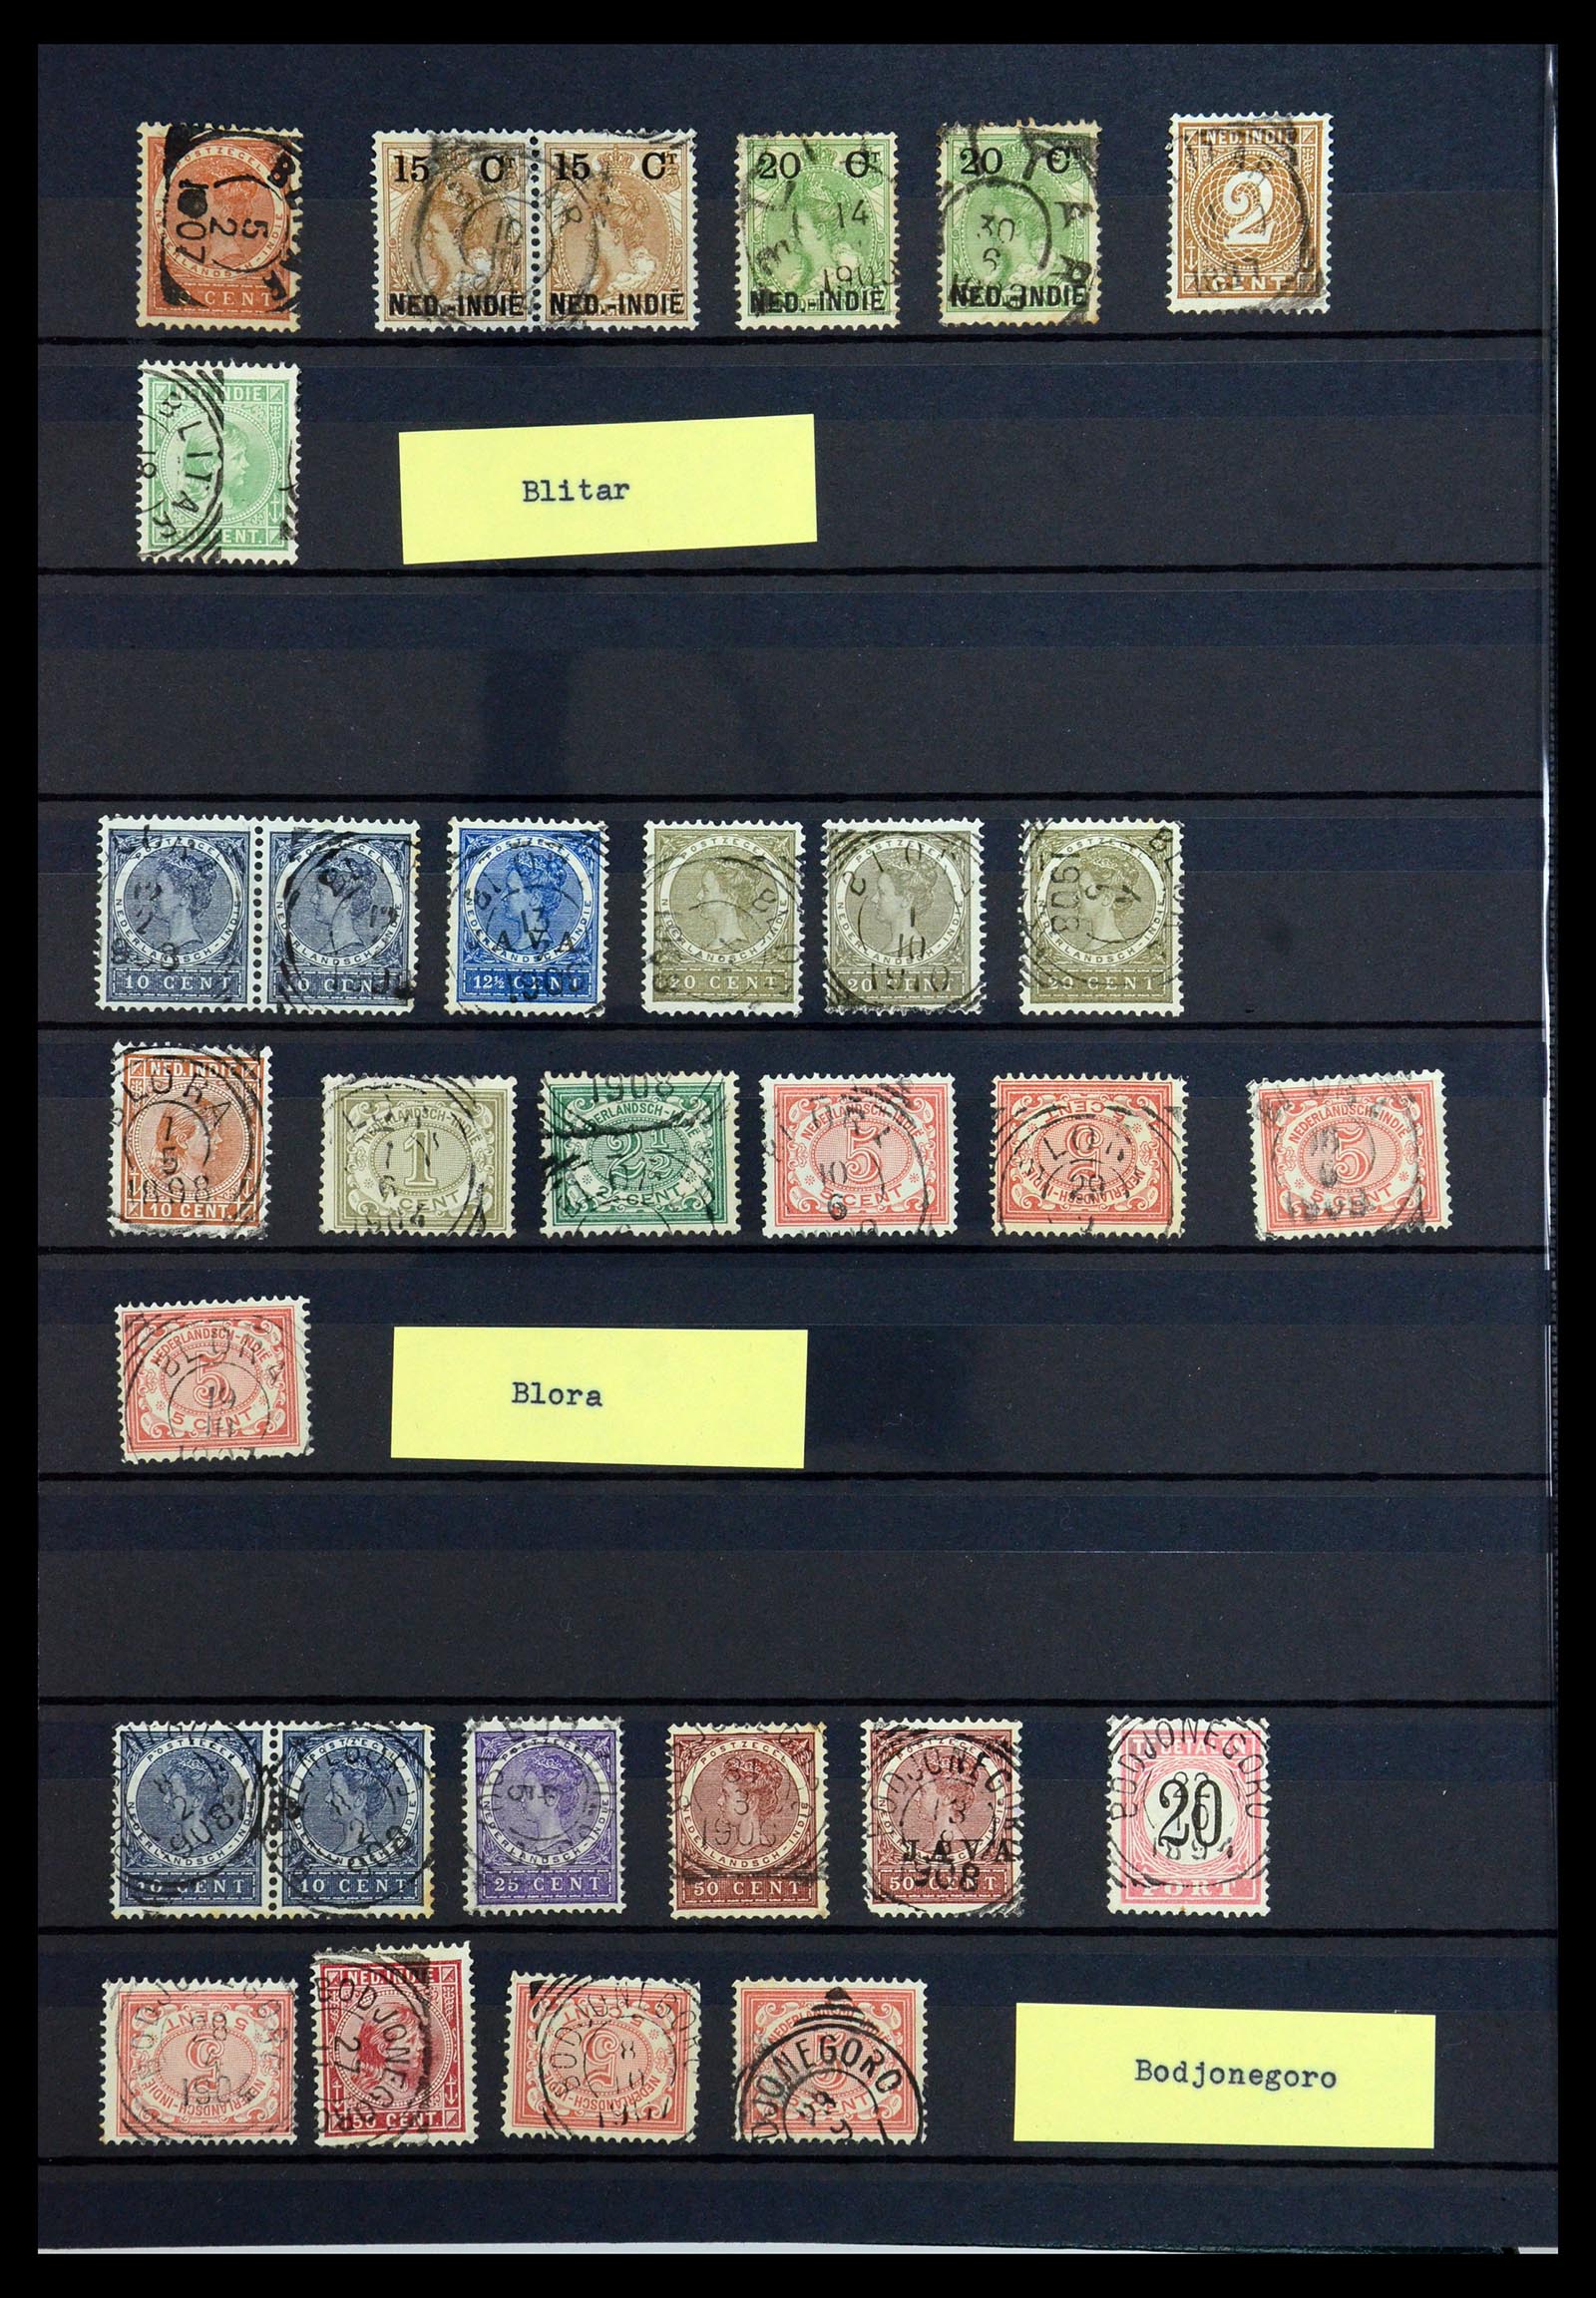 36371 010 - Stamp collection 36371 Dutch east Indies cancels.